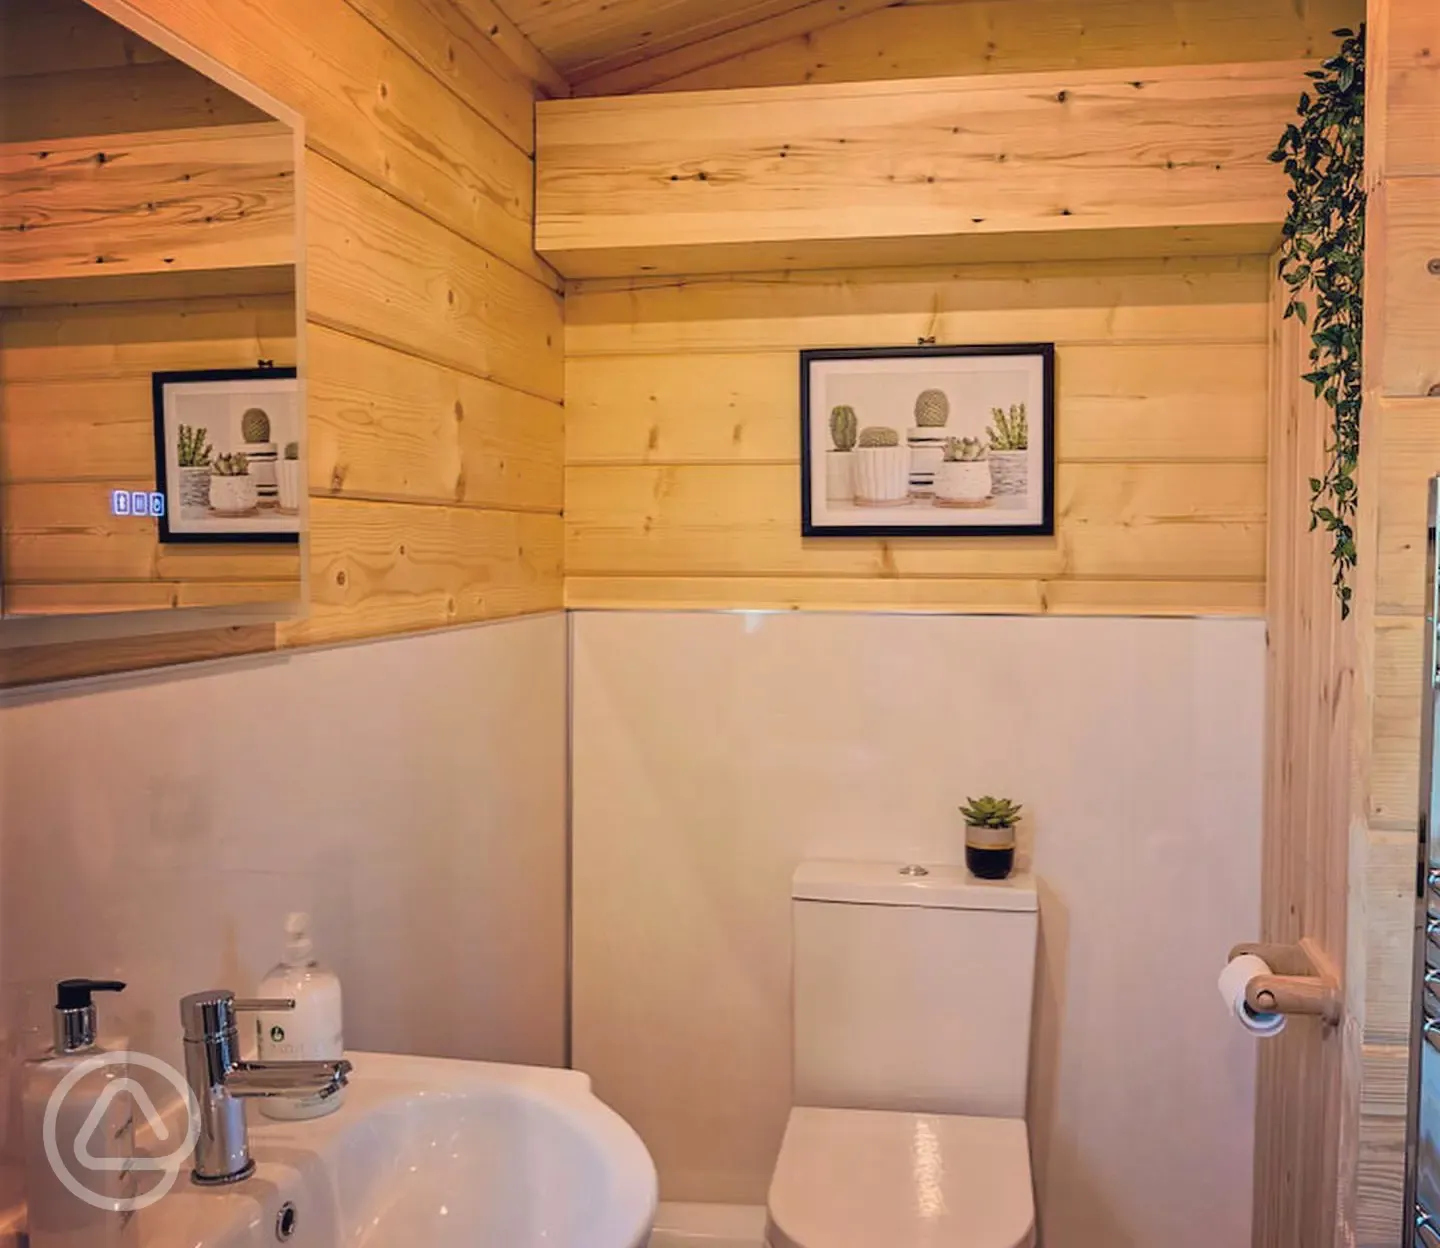 Bathrooms in cabins